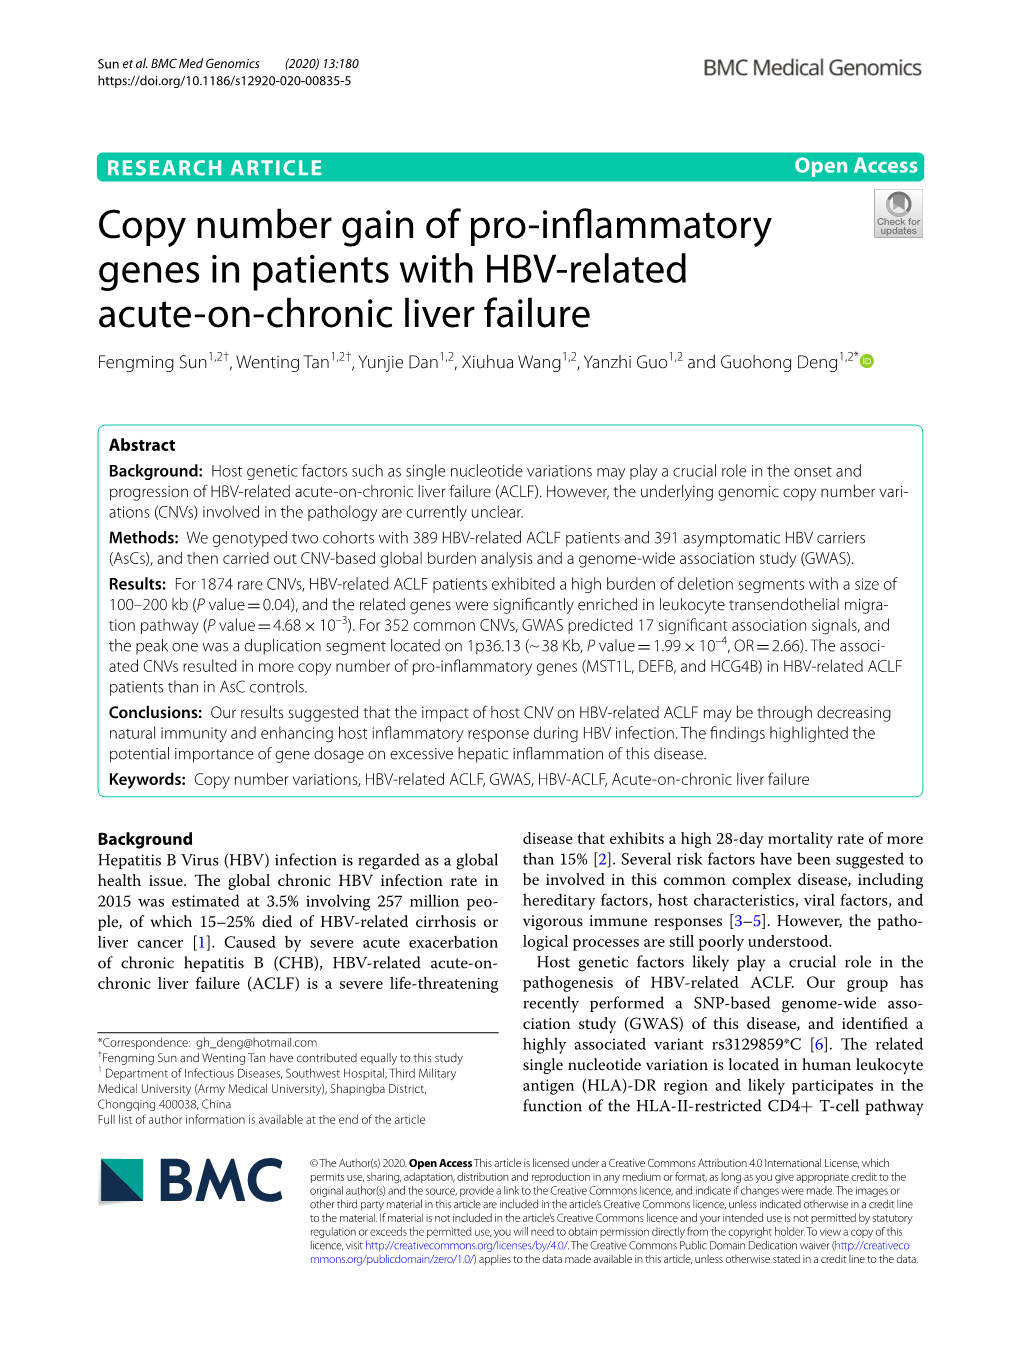 Copy Number Gain of Pro-Inflammatory Genes in Patients with HBV-Related Acute-On-Chronic Liver Failure